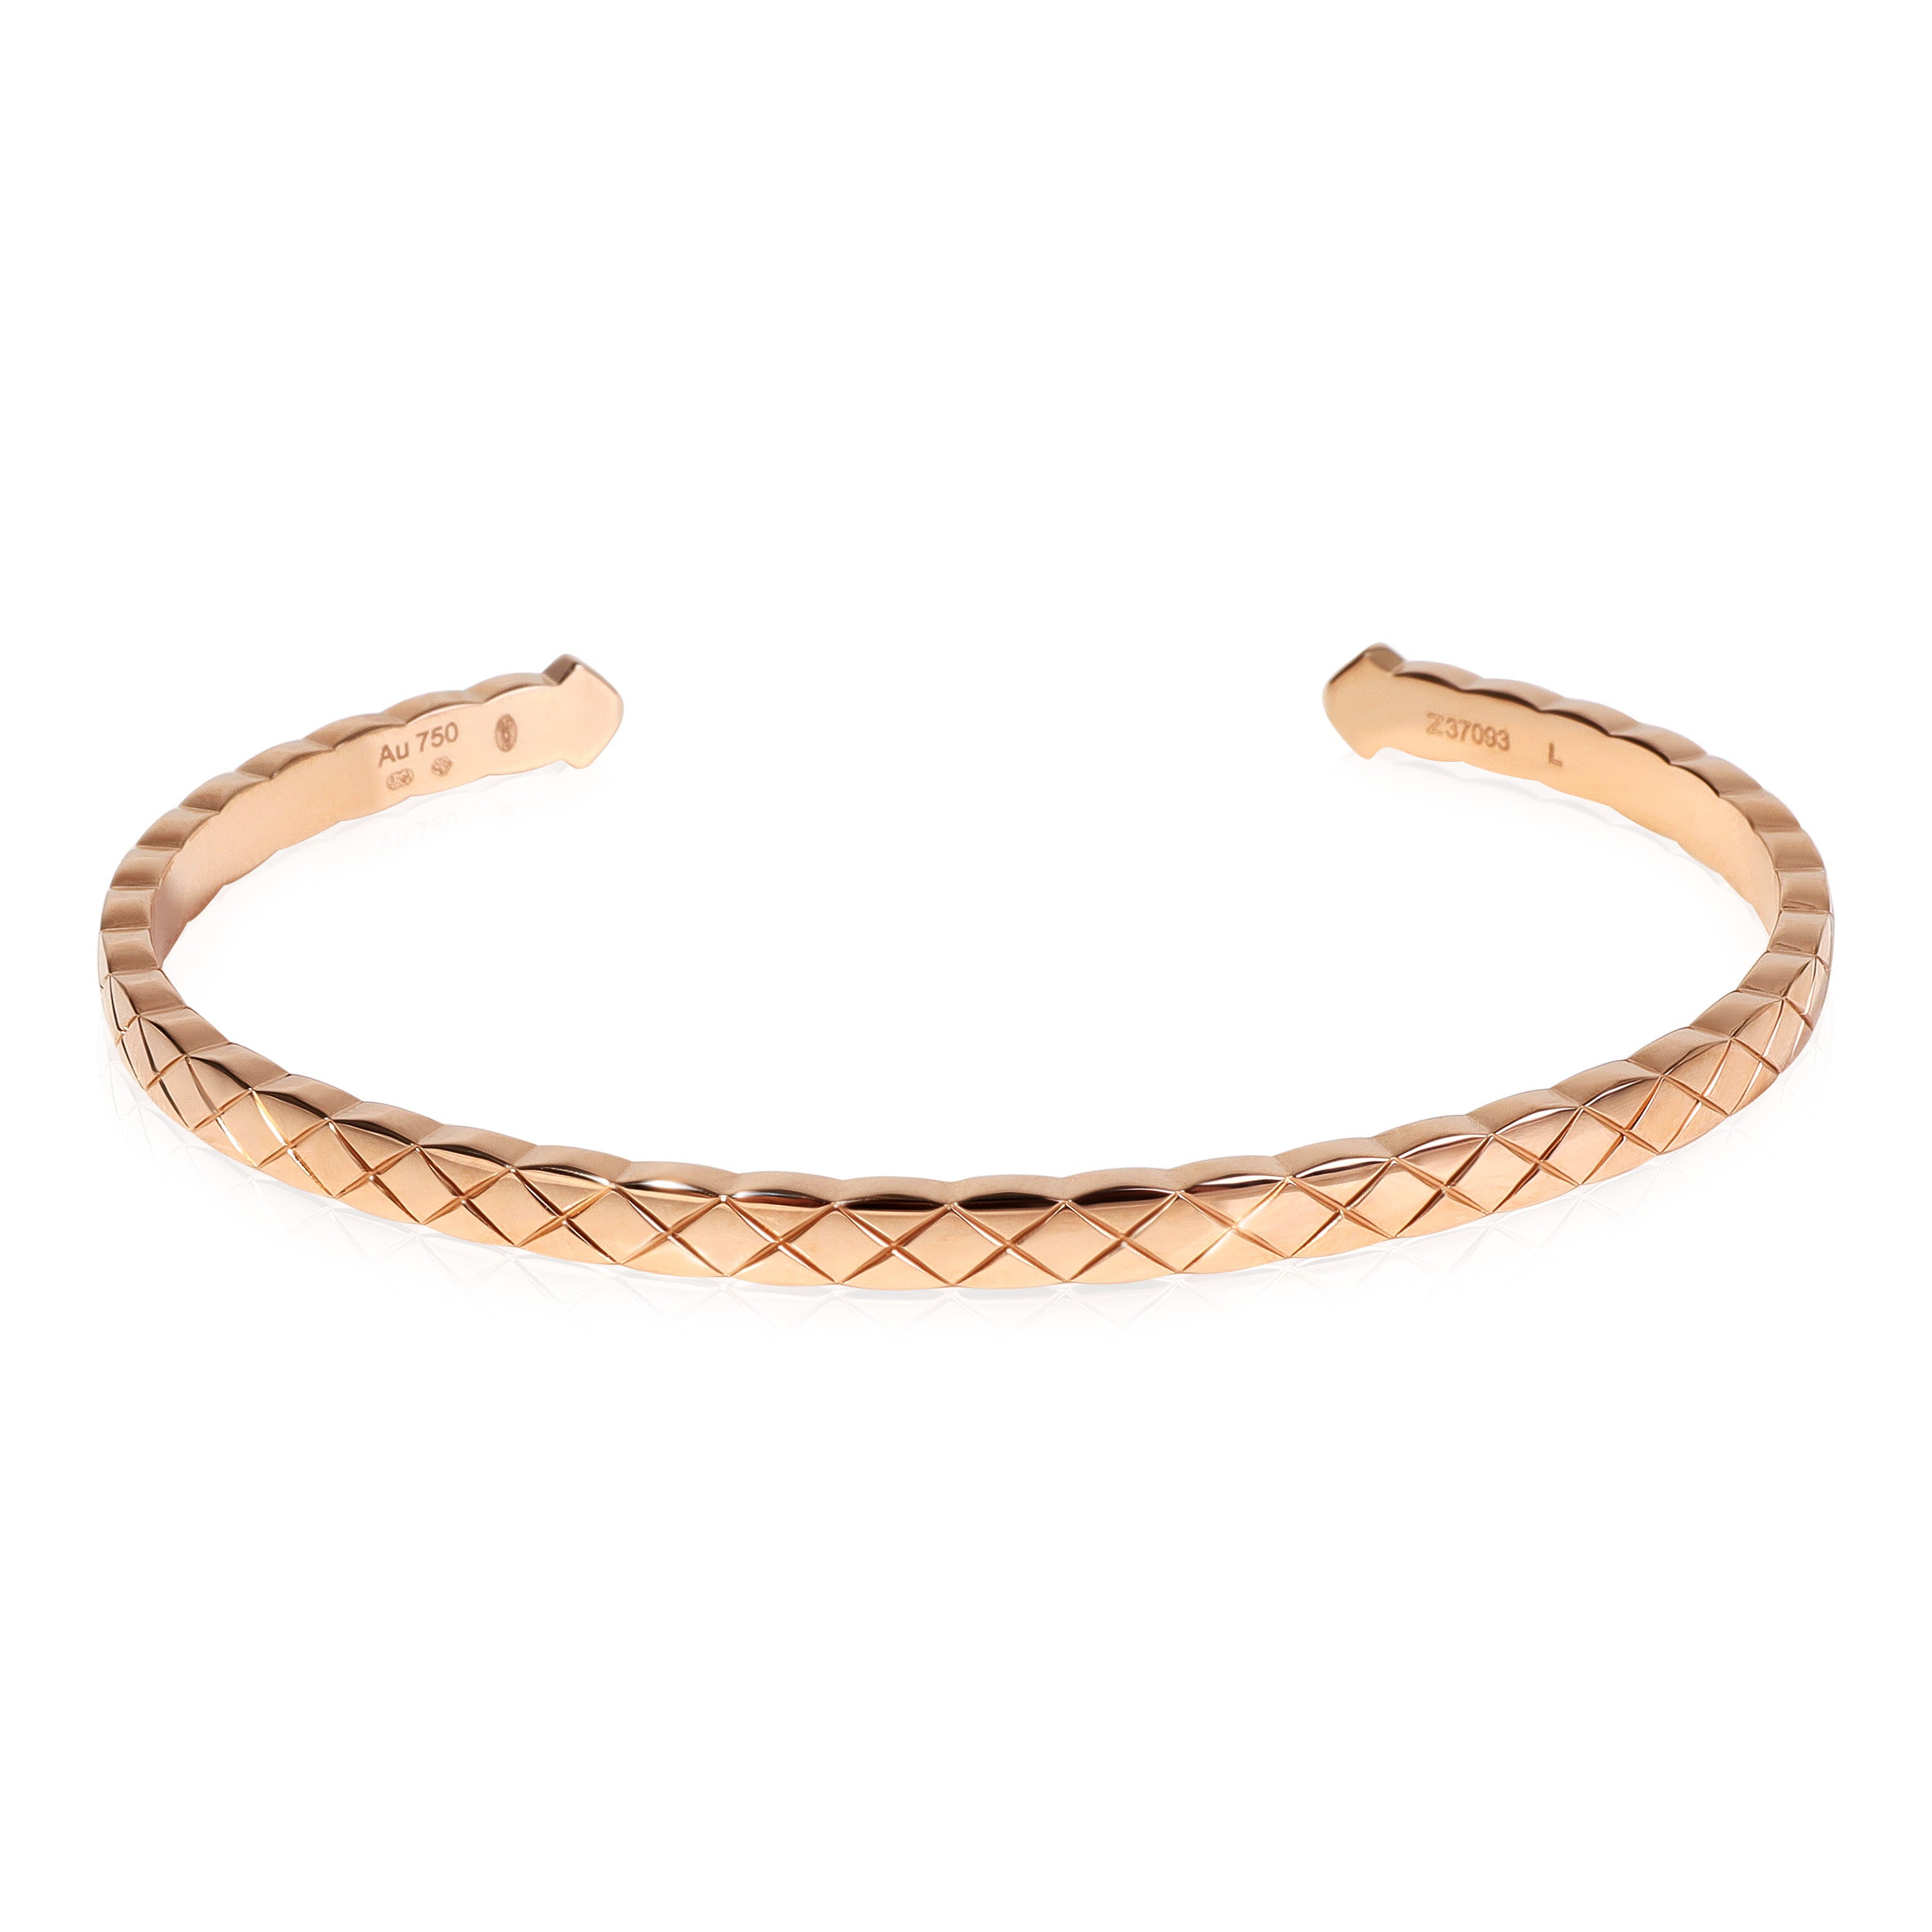 Authentic! Chanel Coco Crush 18K Yellow Gold 2 Wide Cuff Bangle Bracelet Size S